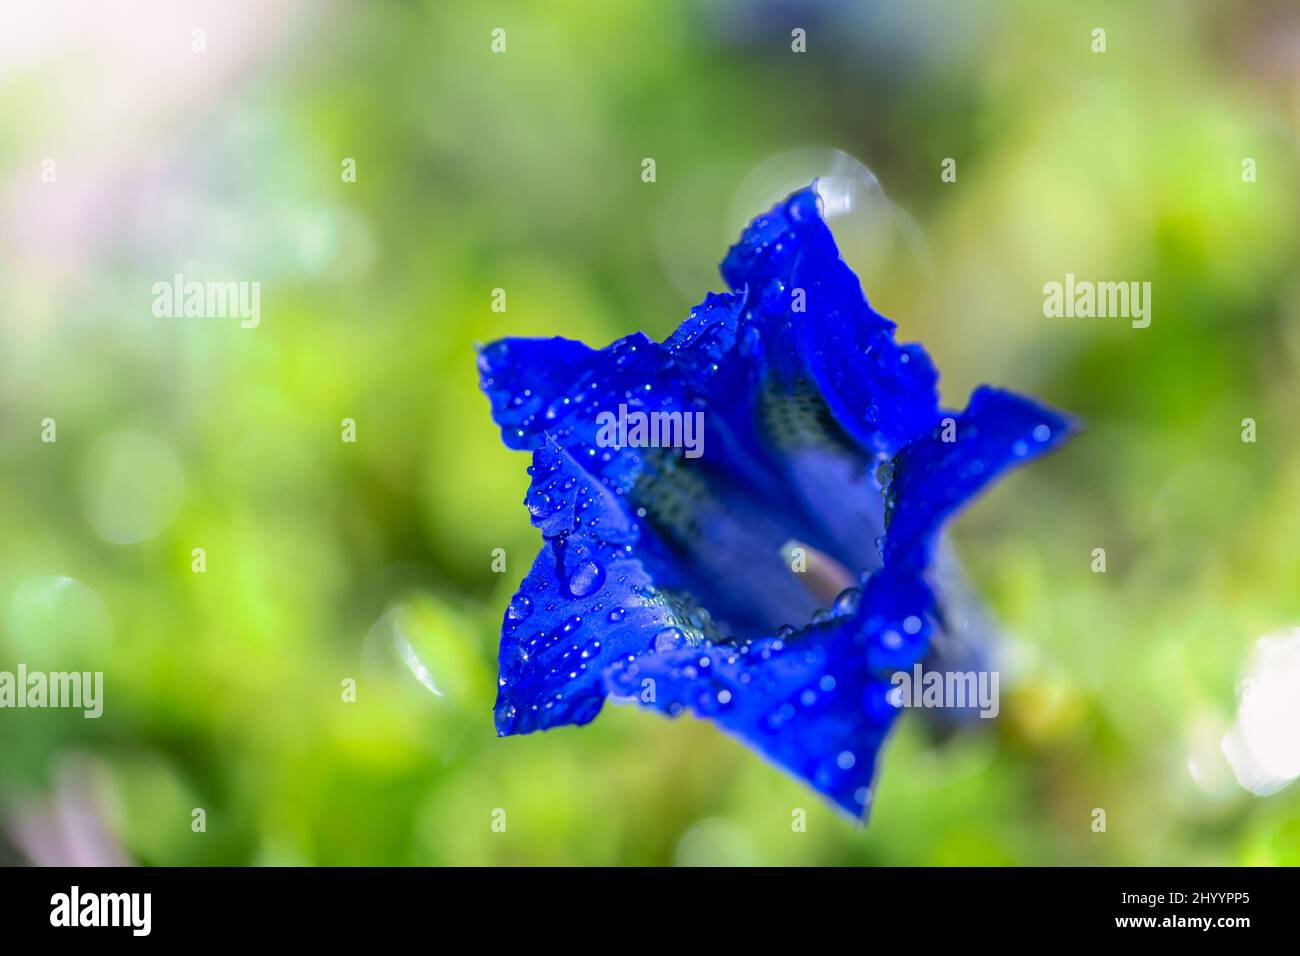 Gentiana clusii, also know as Clusius gentian or flower of the sweet-lady. Blue flower with water drops in close-up view on blurred background. Stock Photo